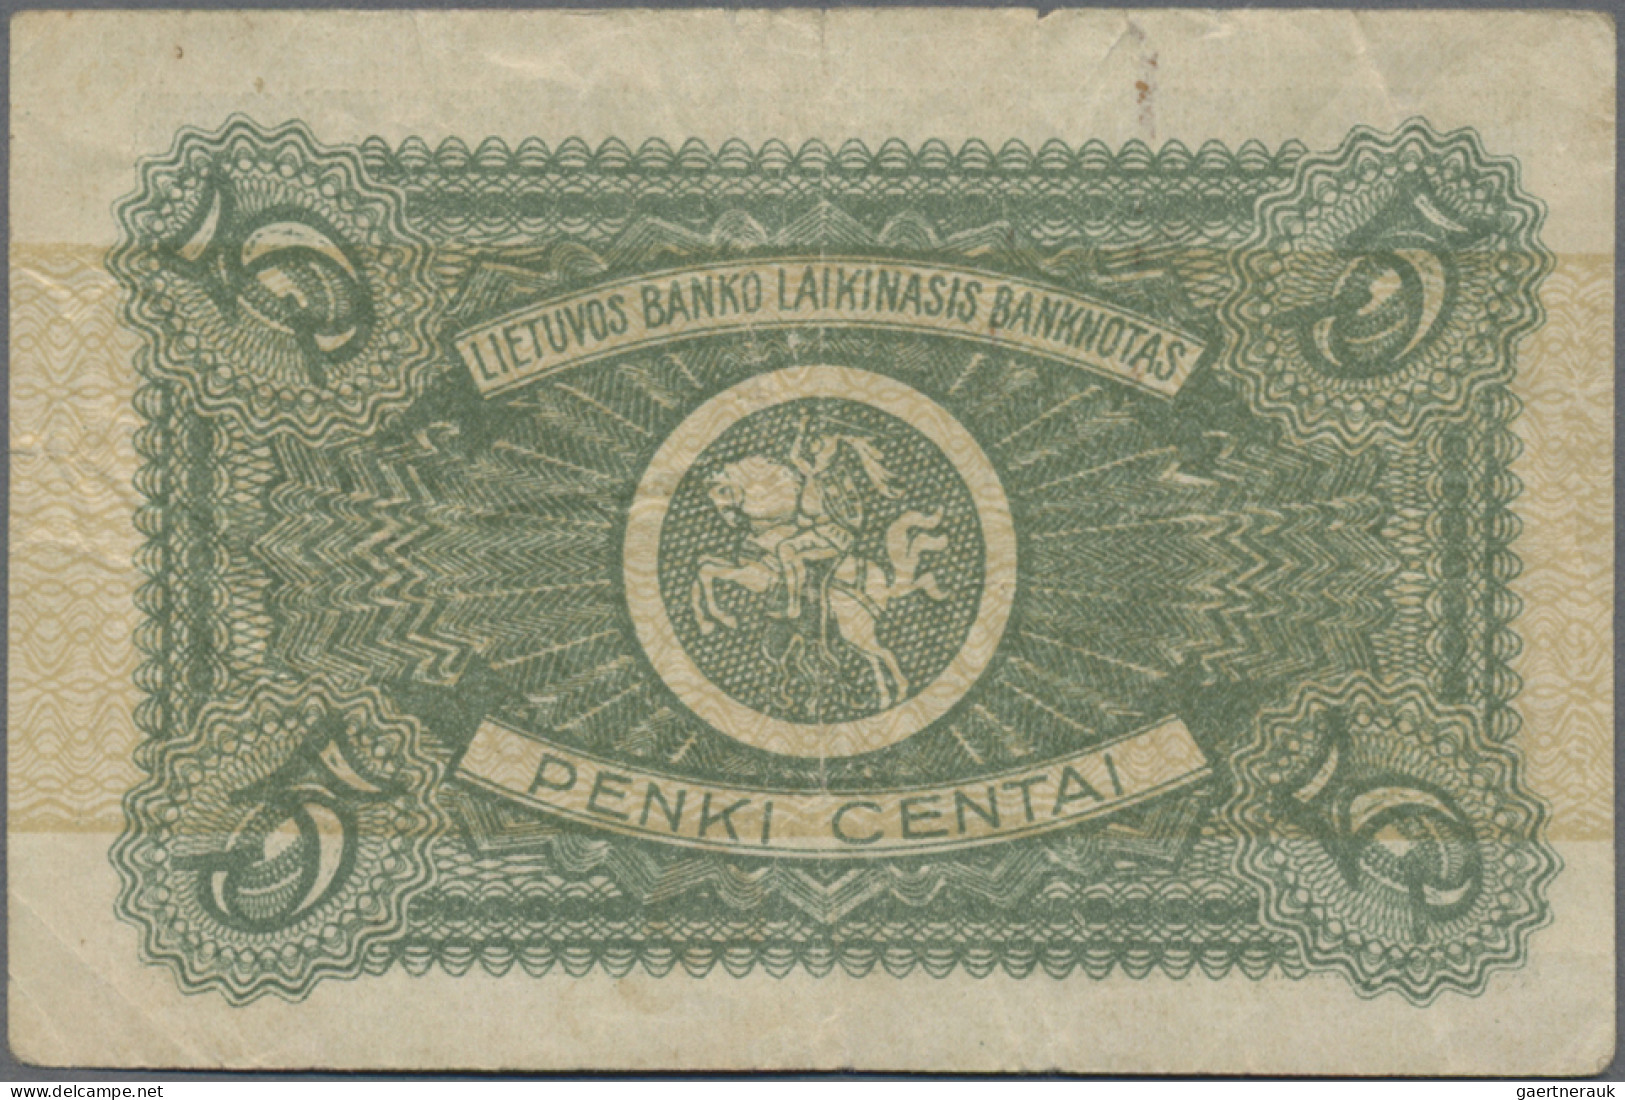 Lithuania: Very Nice Set With 5 Banknotes, Series 1922, Comprising 1 Centas (P.1 - Lituania